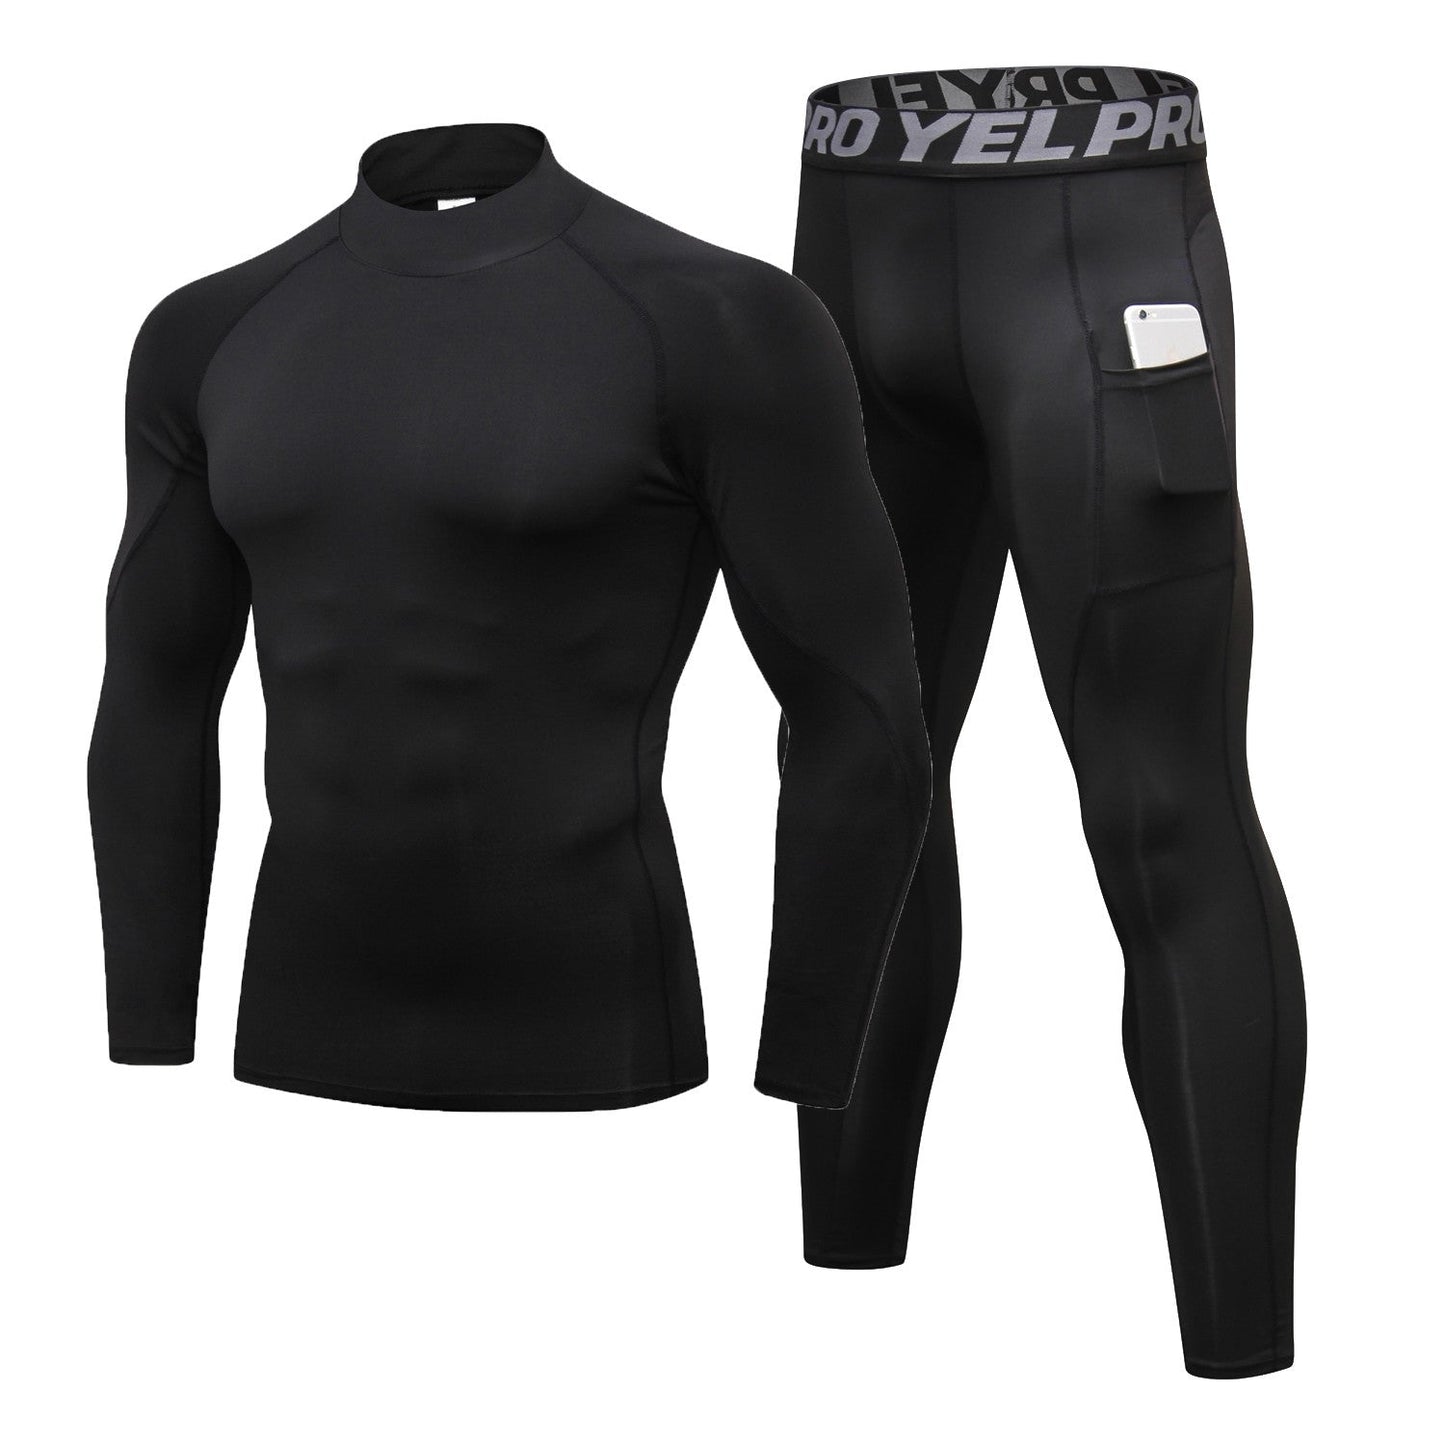 Mens Compression Running Leggings Athletic Tights with Phone Pocket